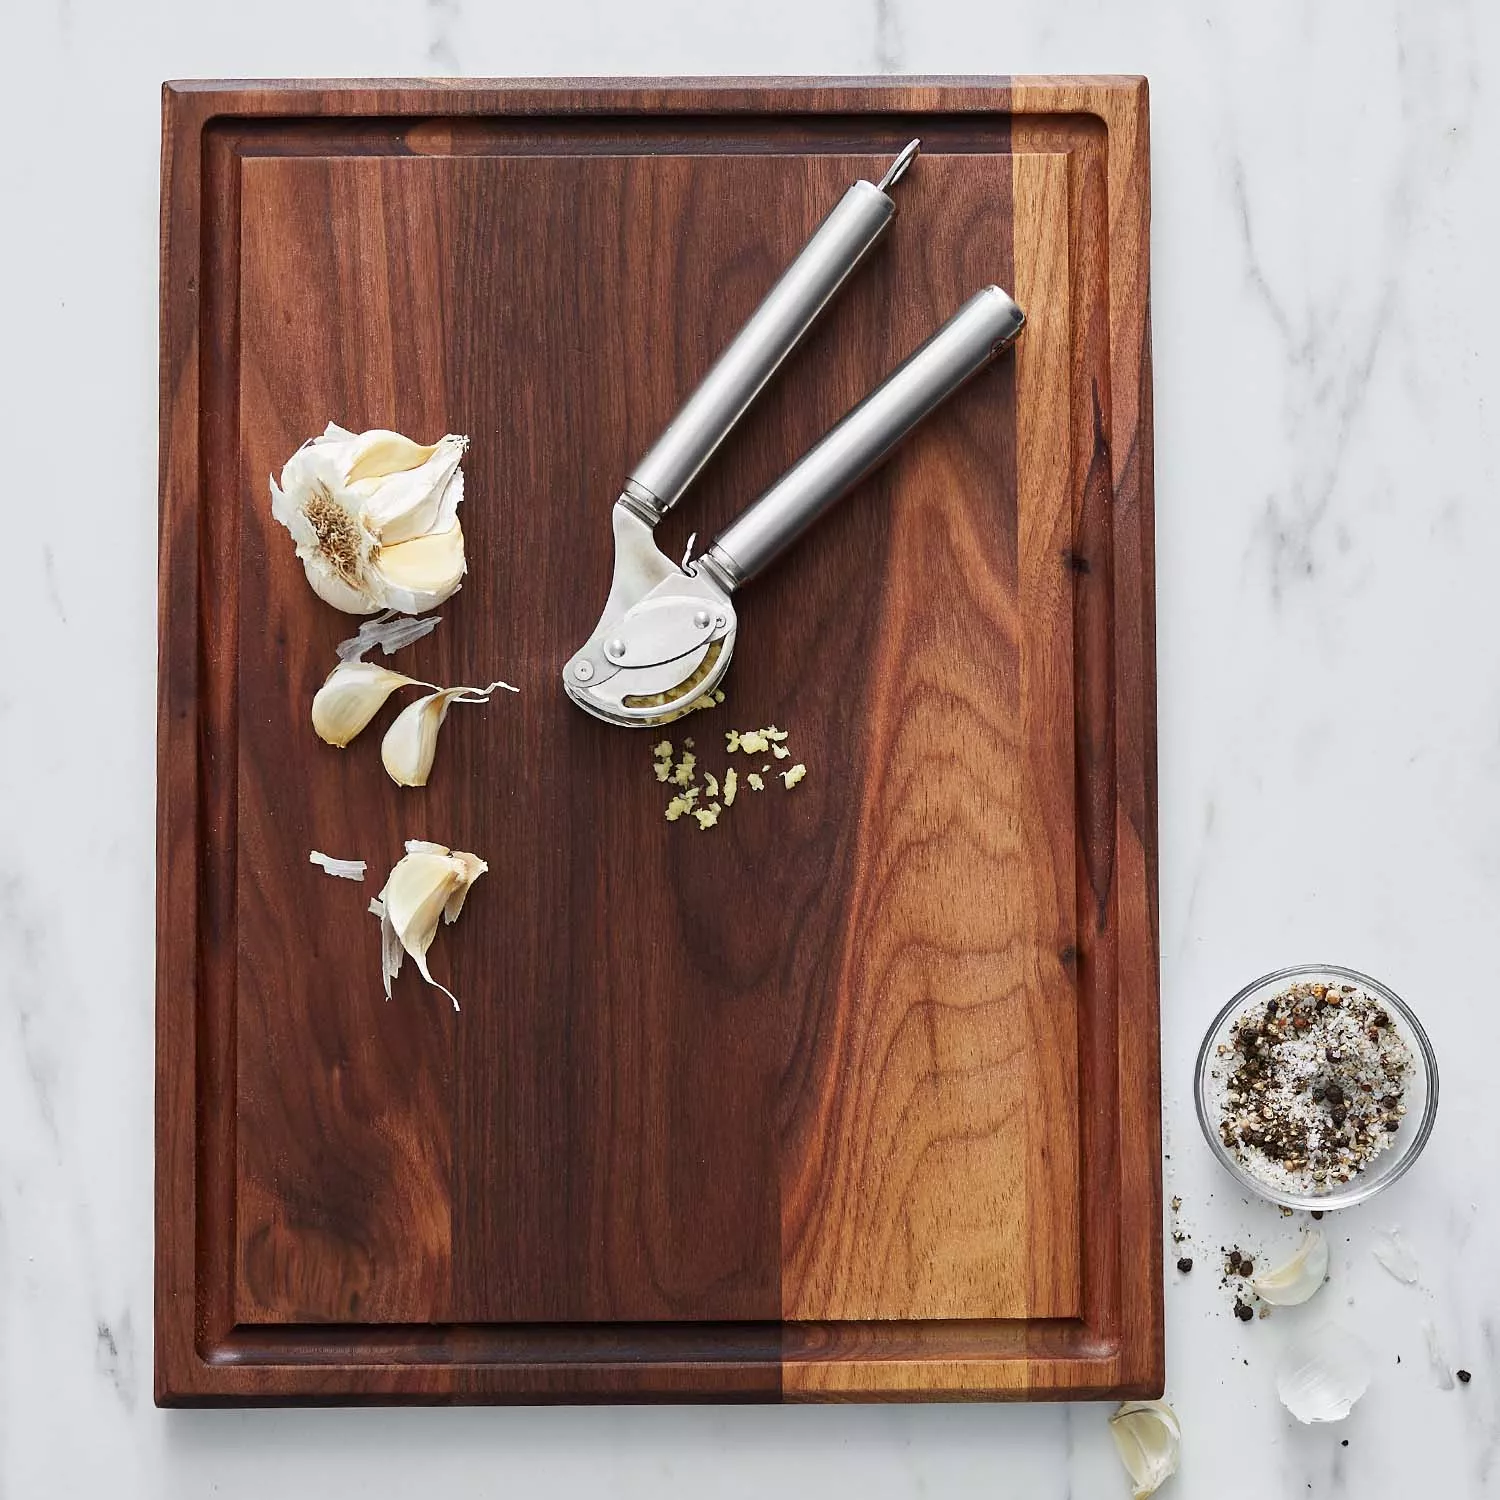 Rosle Stainless Steel – Mincing Garlic, Ginger Press with Scraper